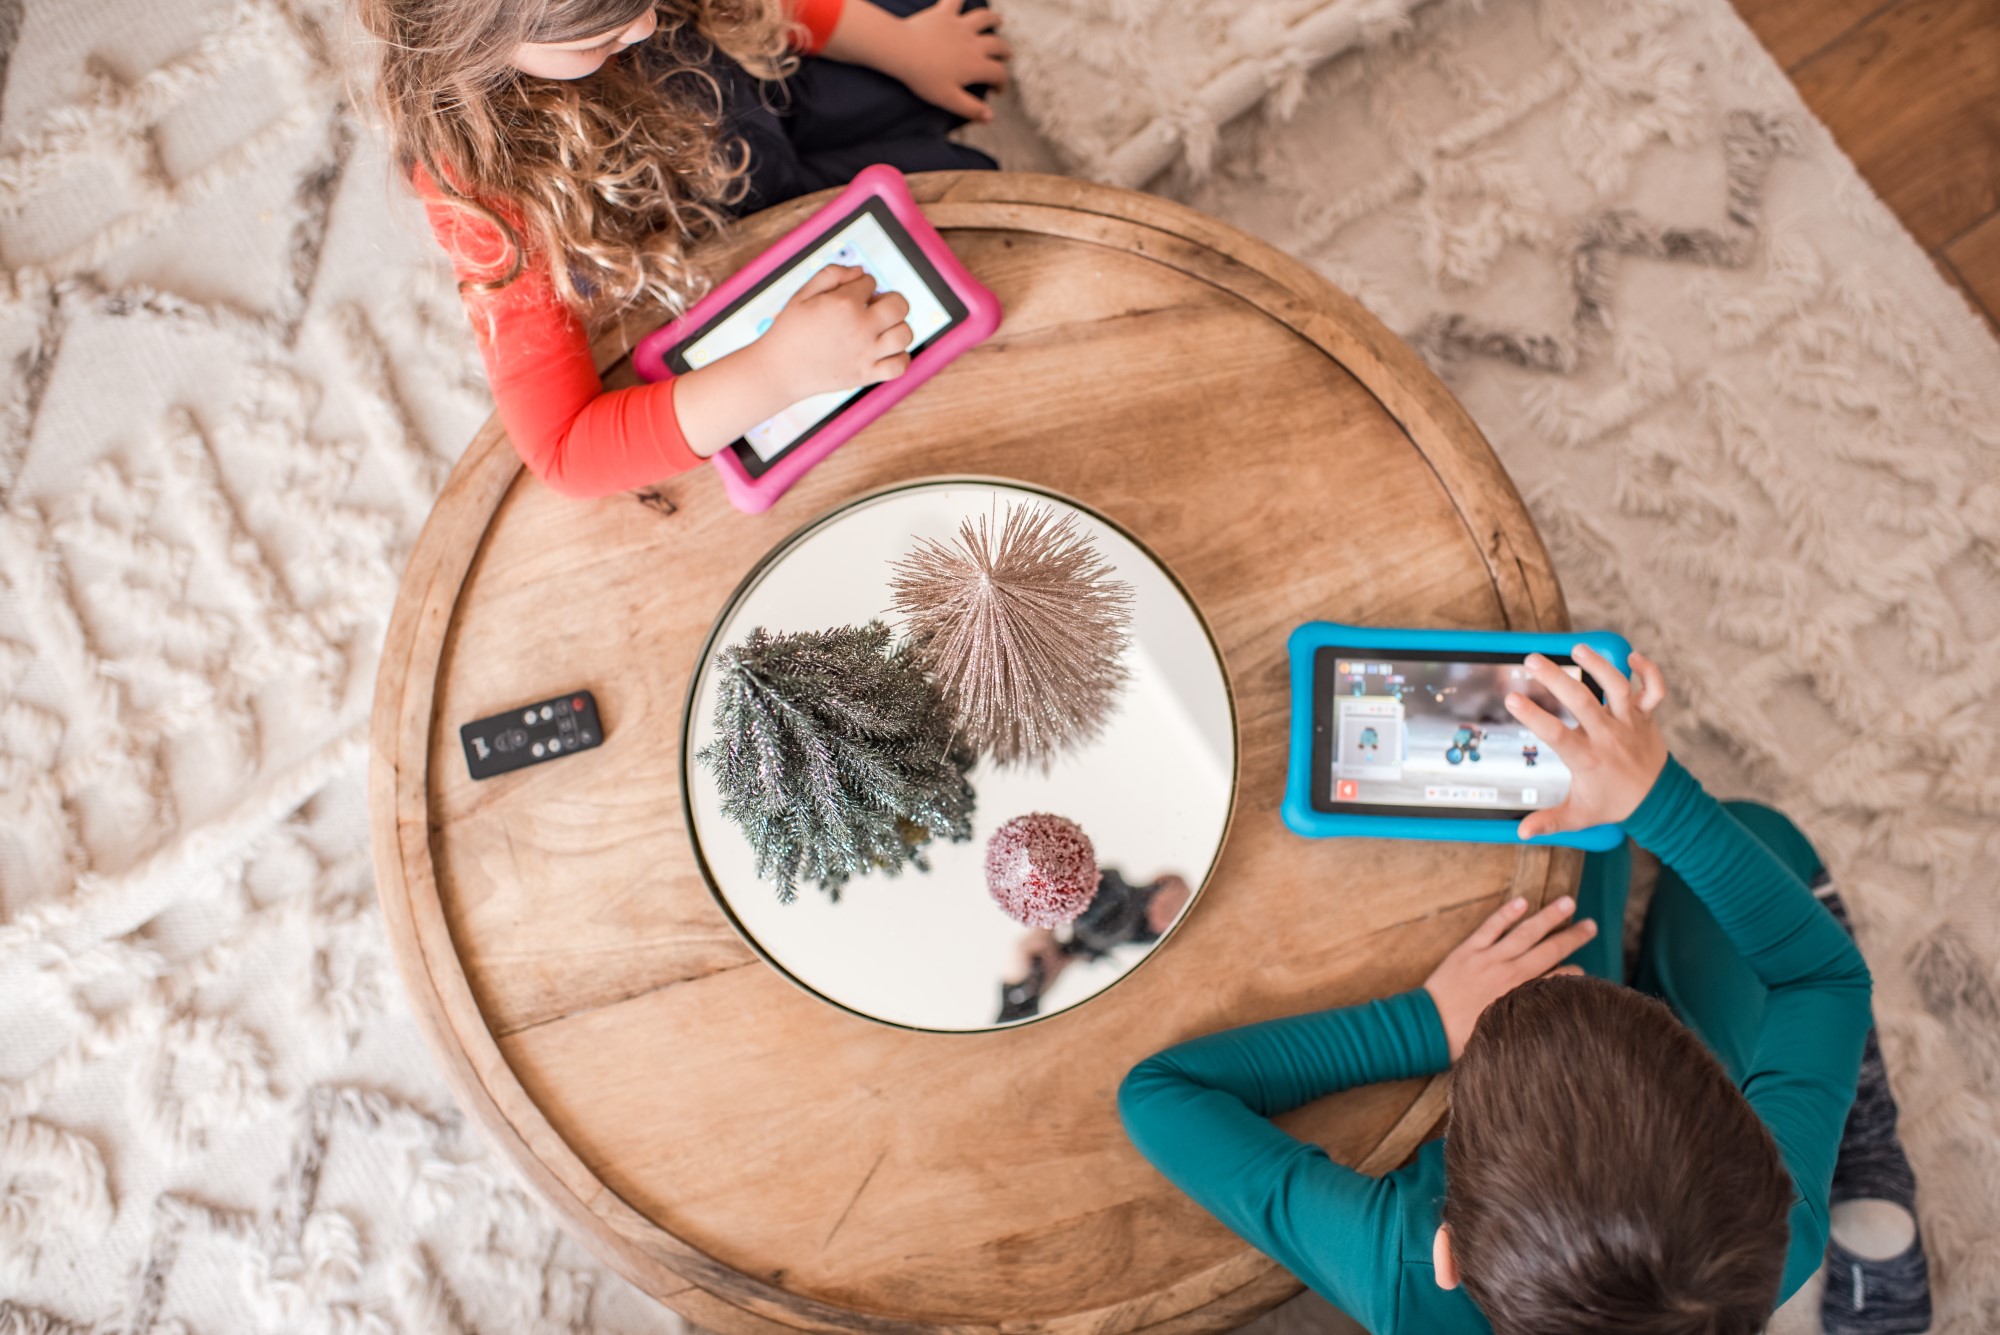 Two kids on screen devices indoors